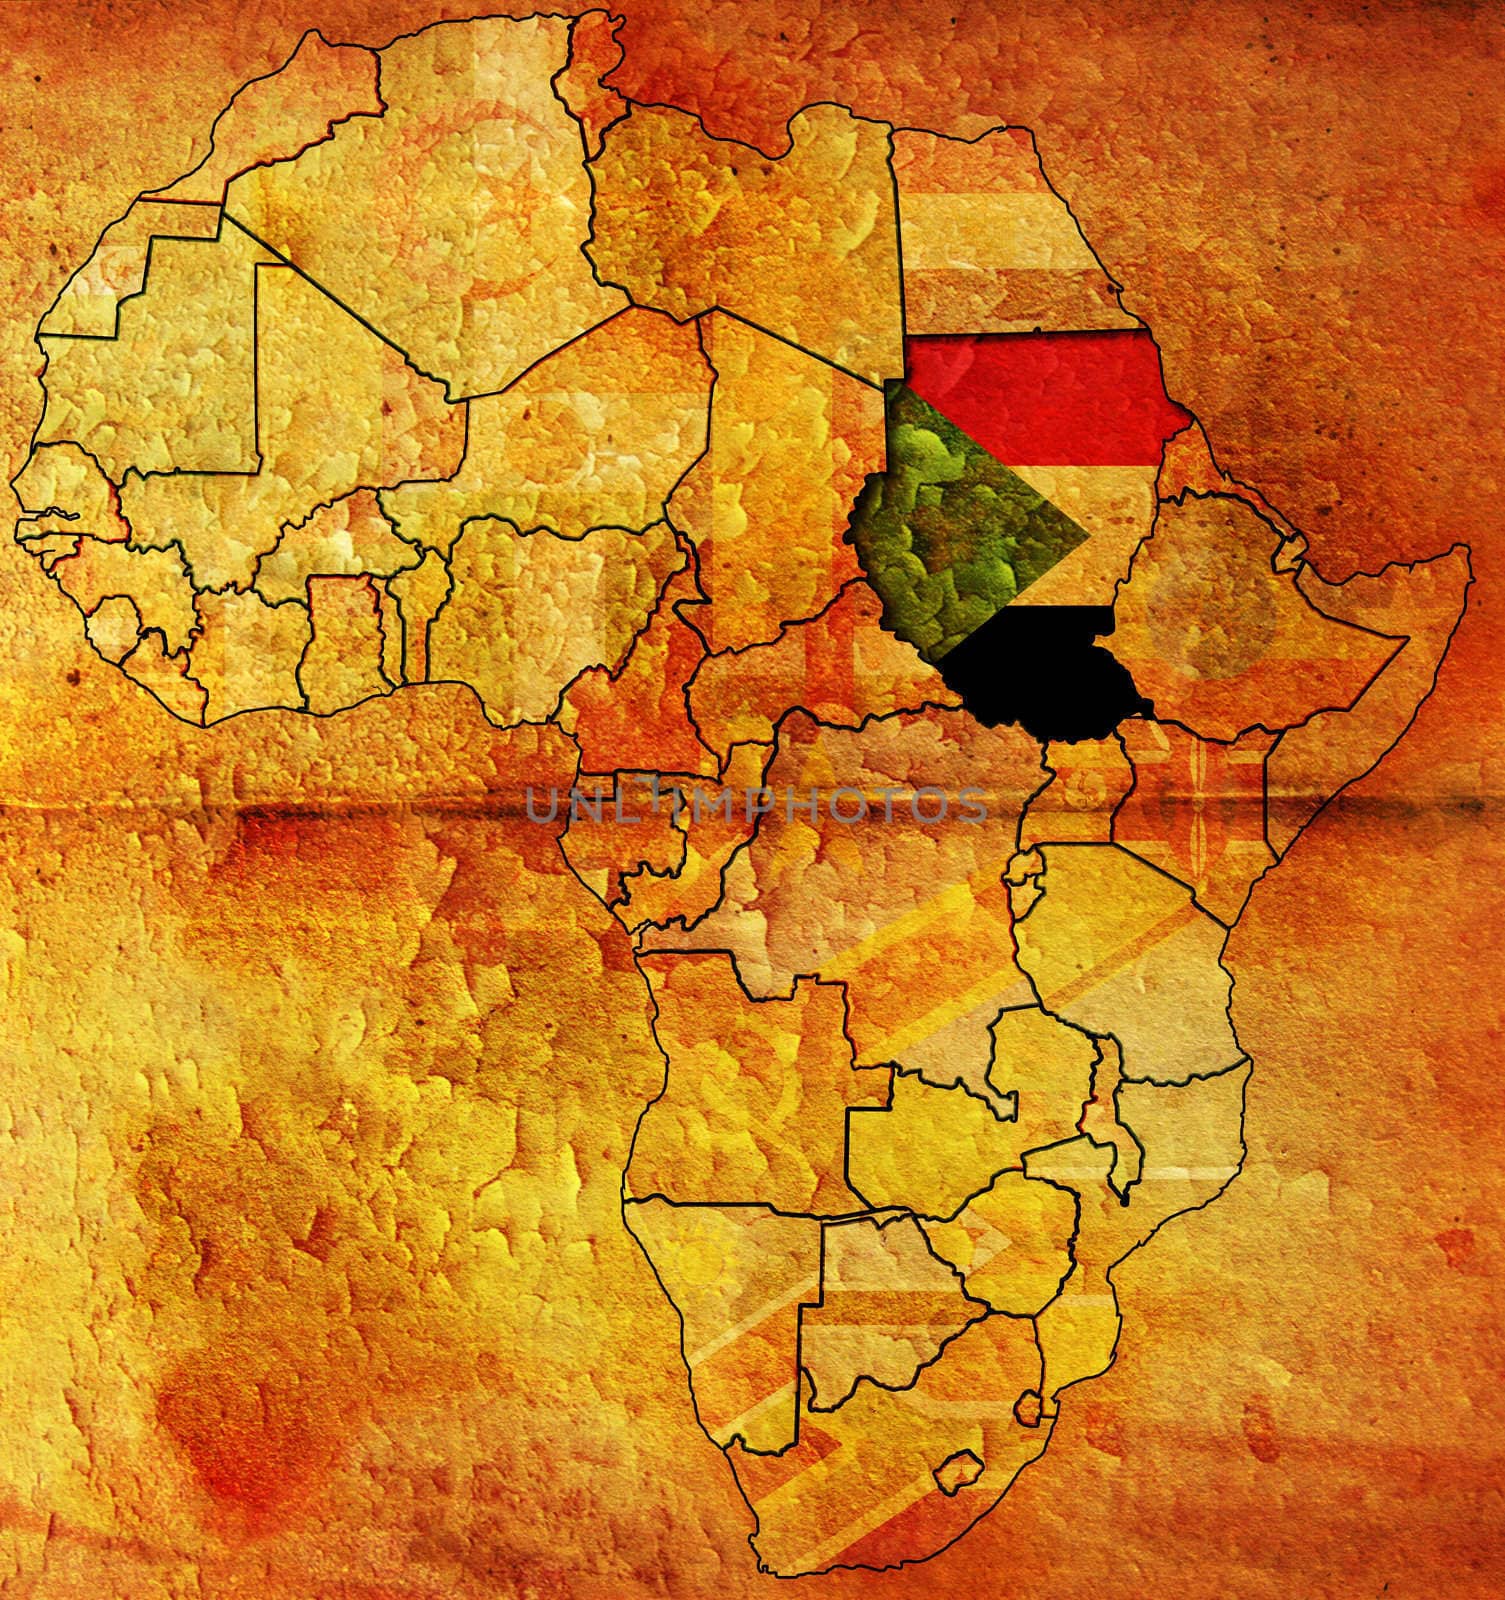 sudan on africa map by michal812